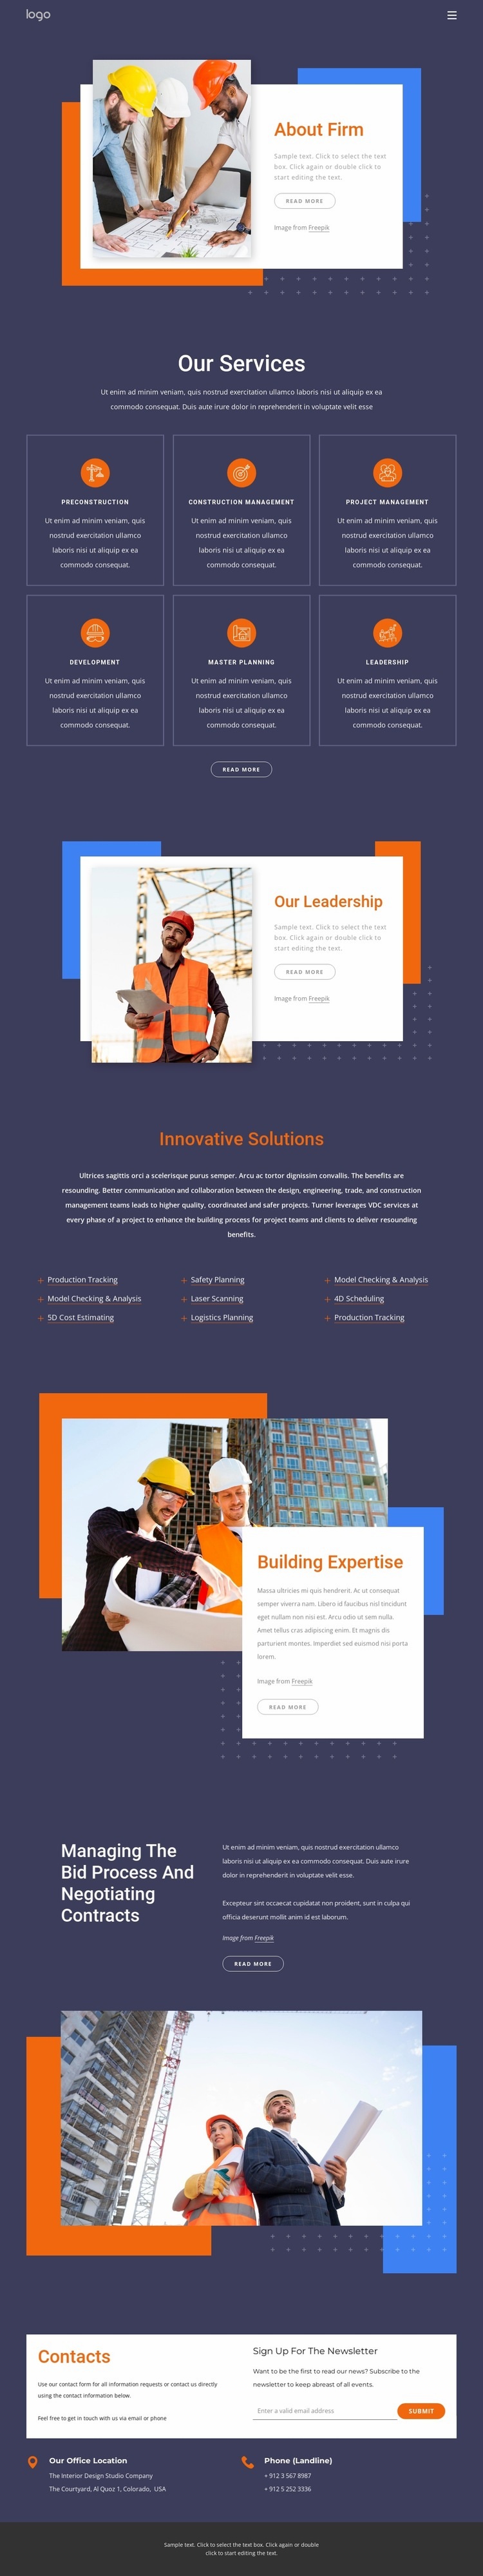 We build the structures and infrastructure Homepage Design